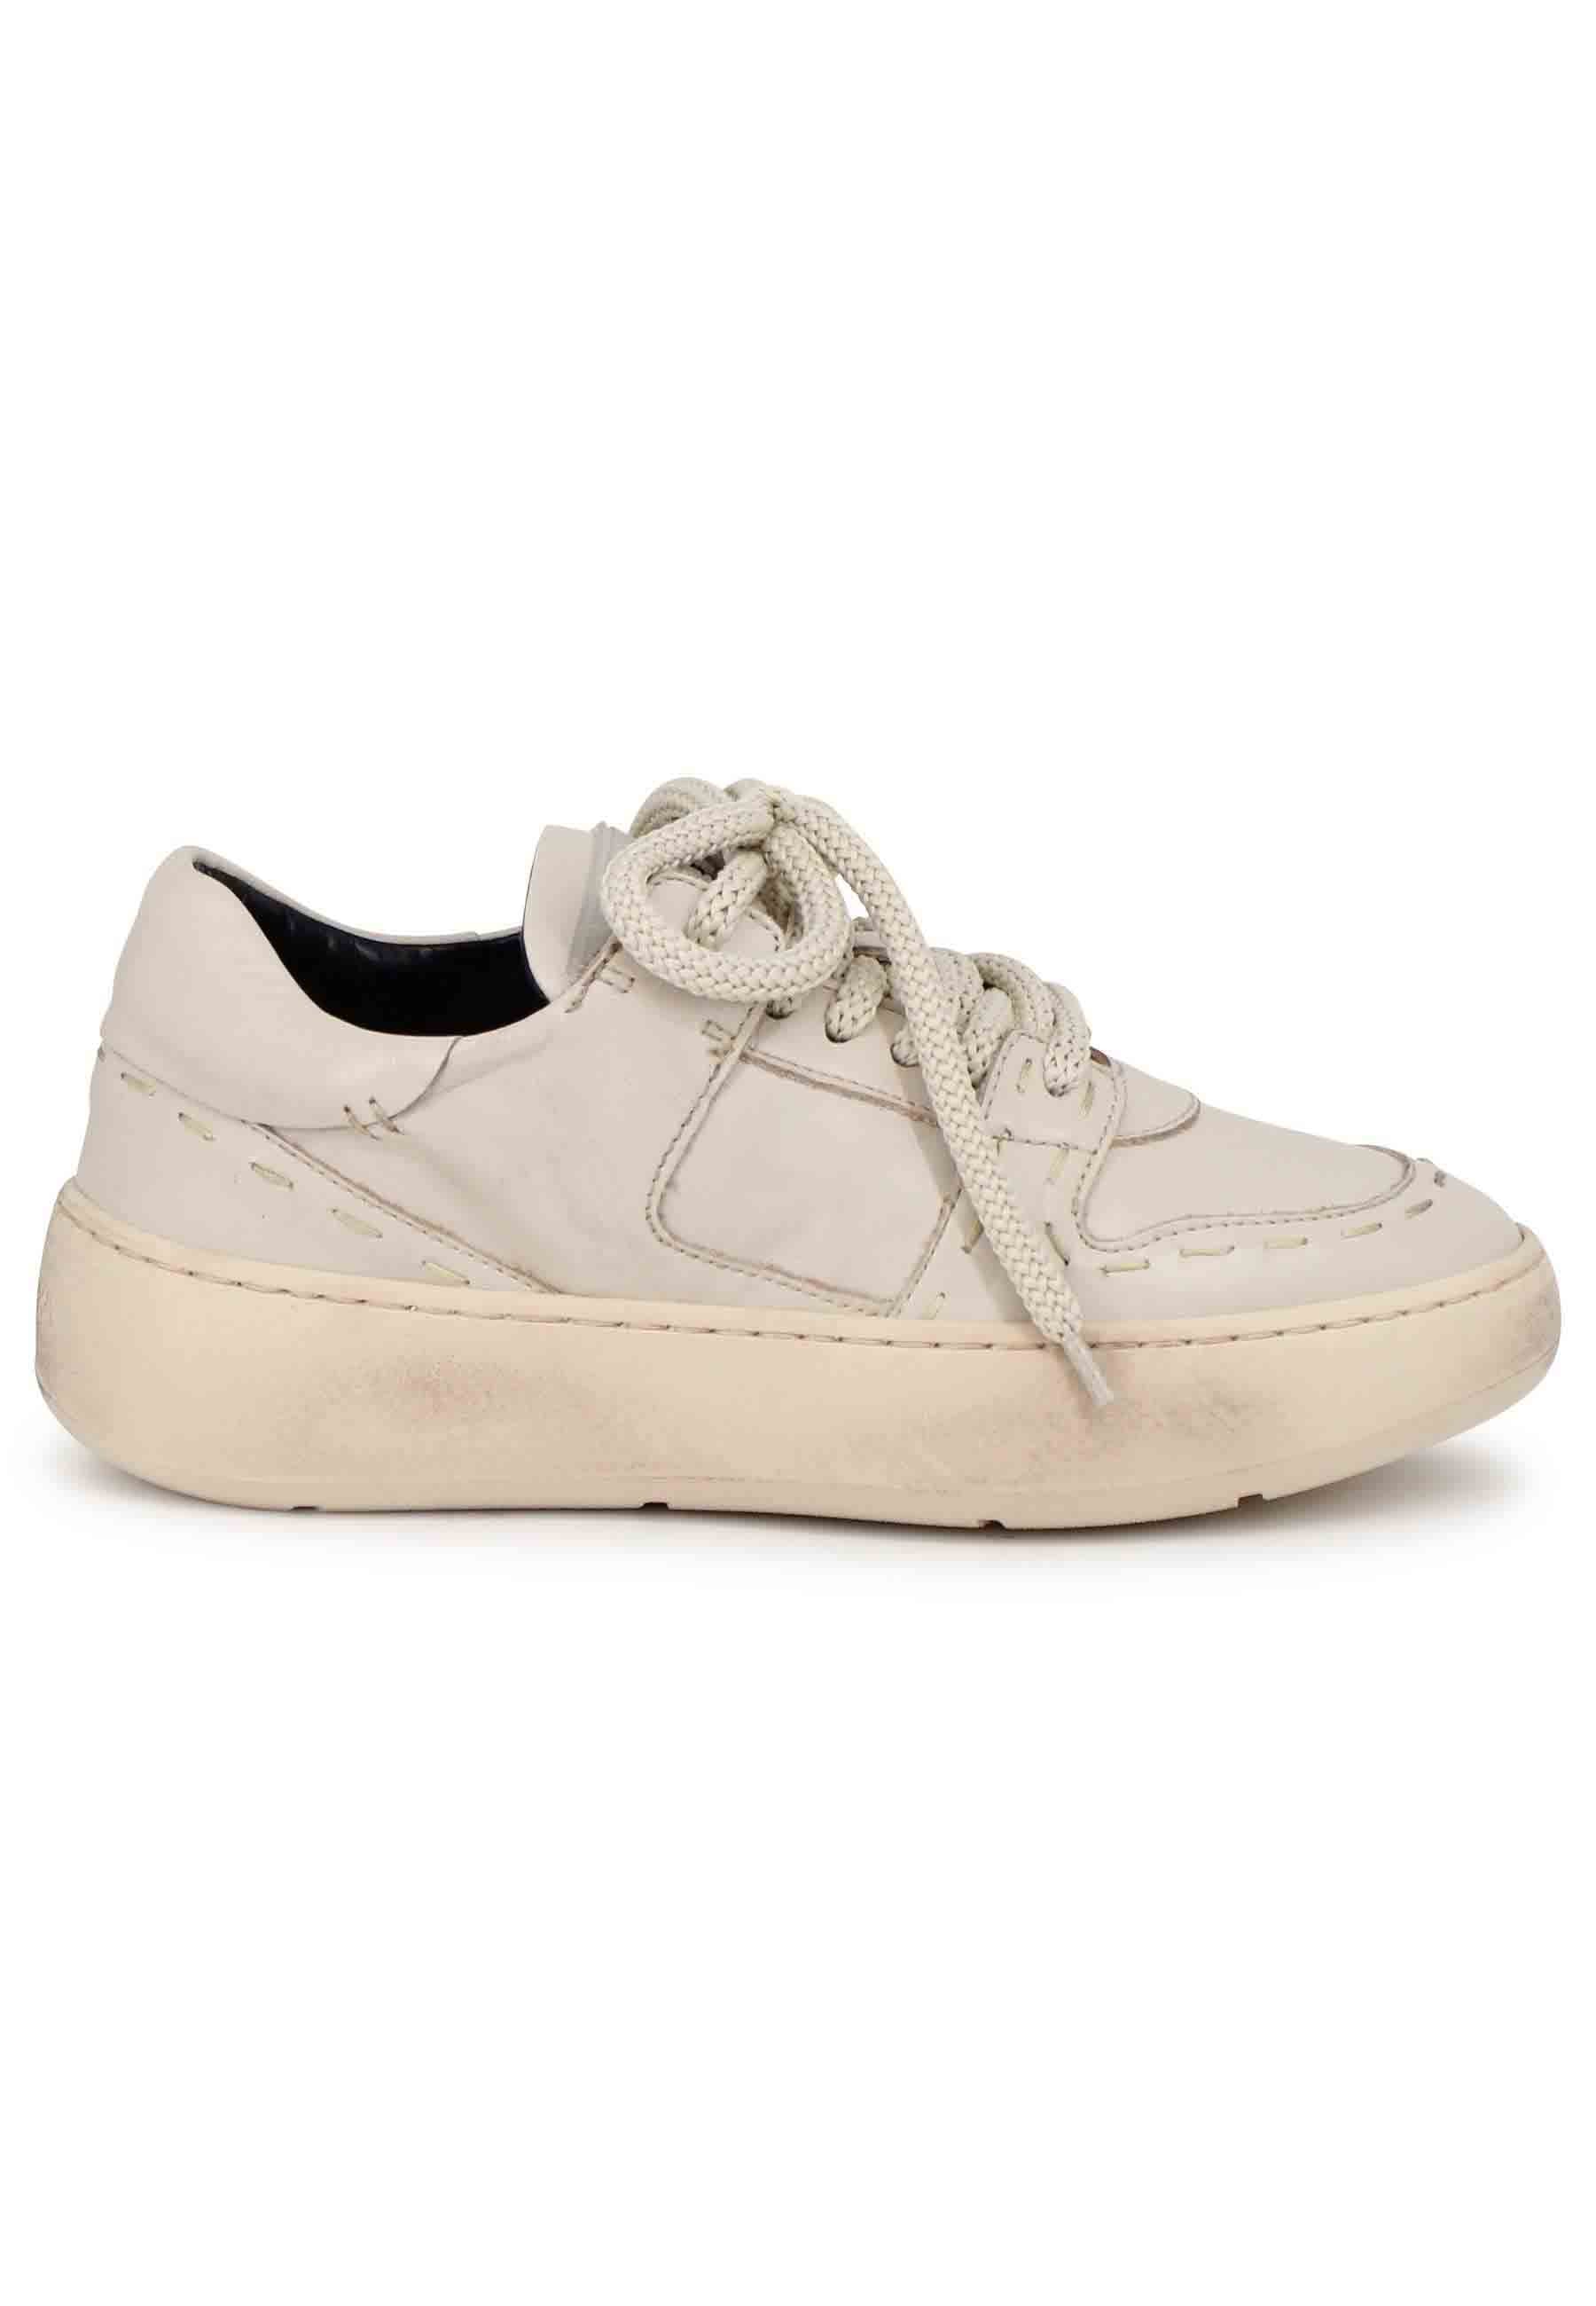 Women's off-white leather sneakers